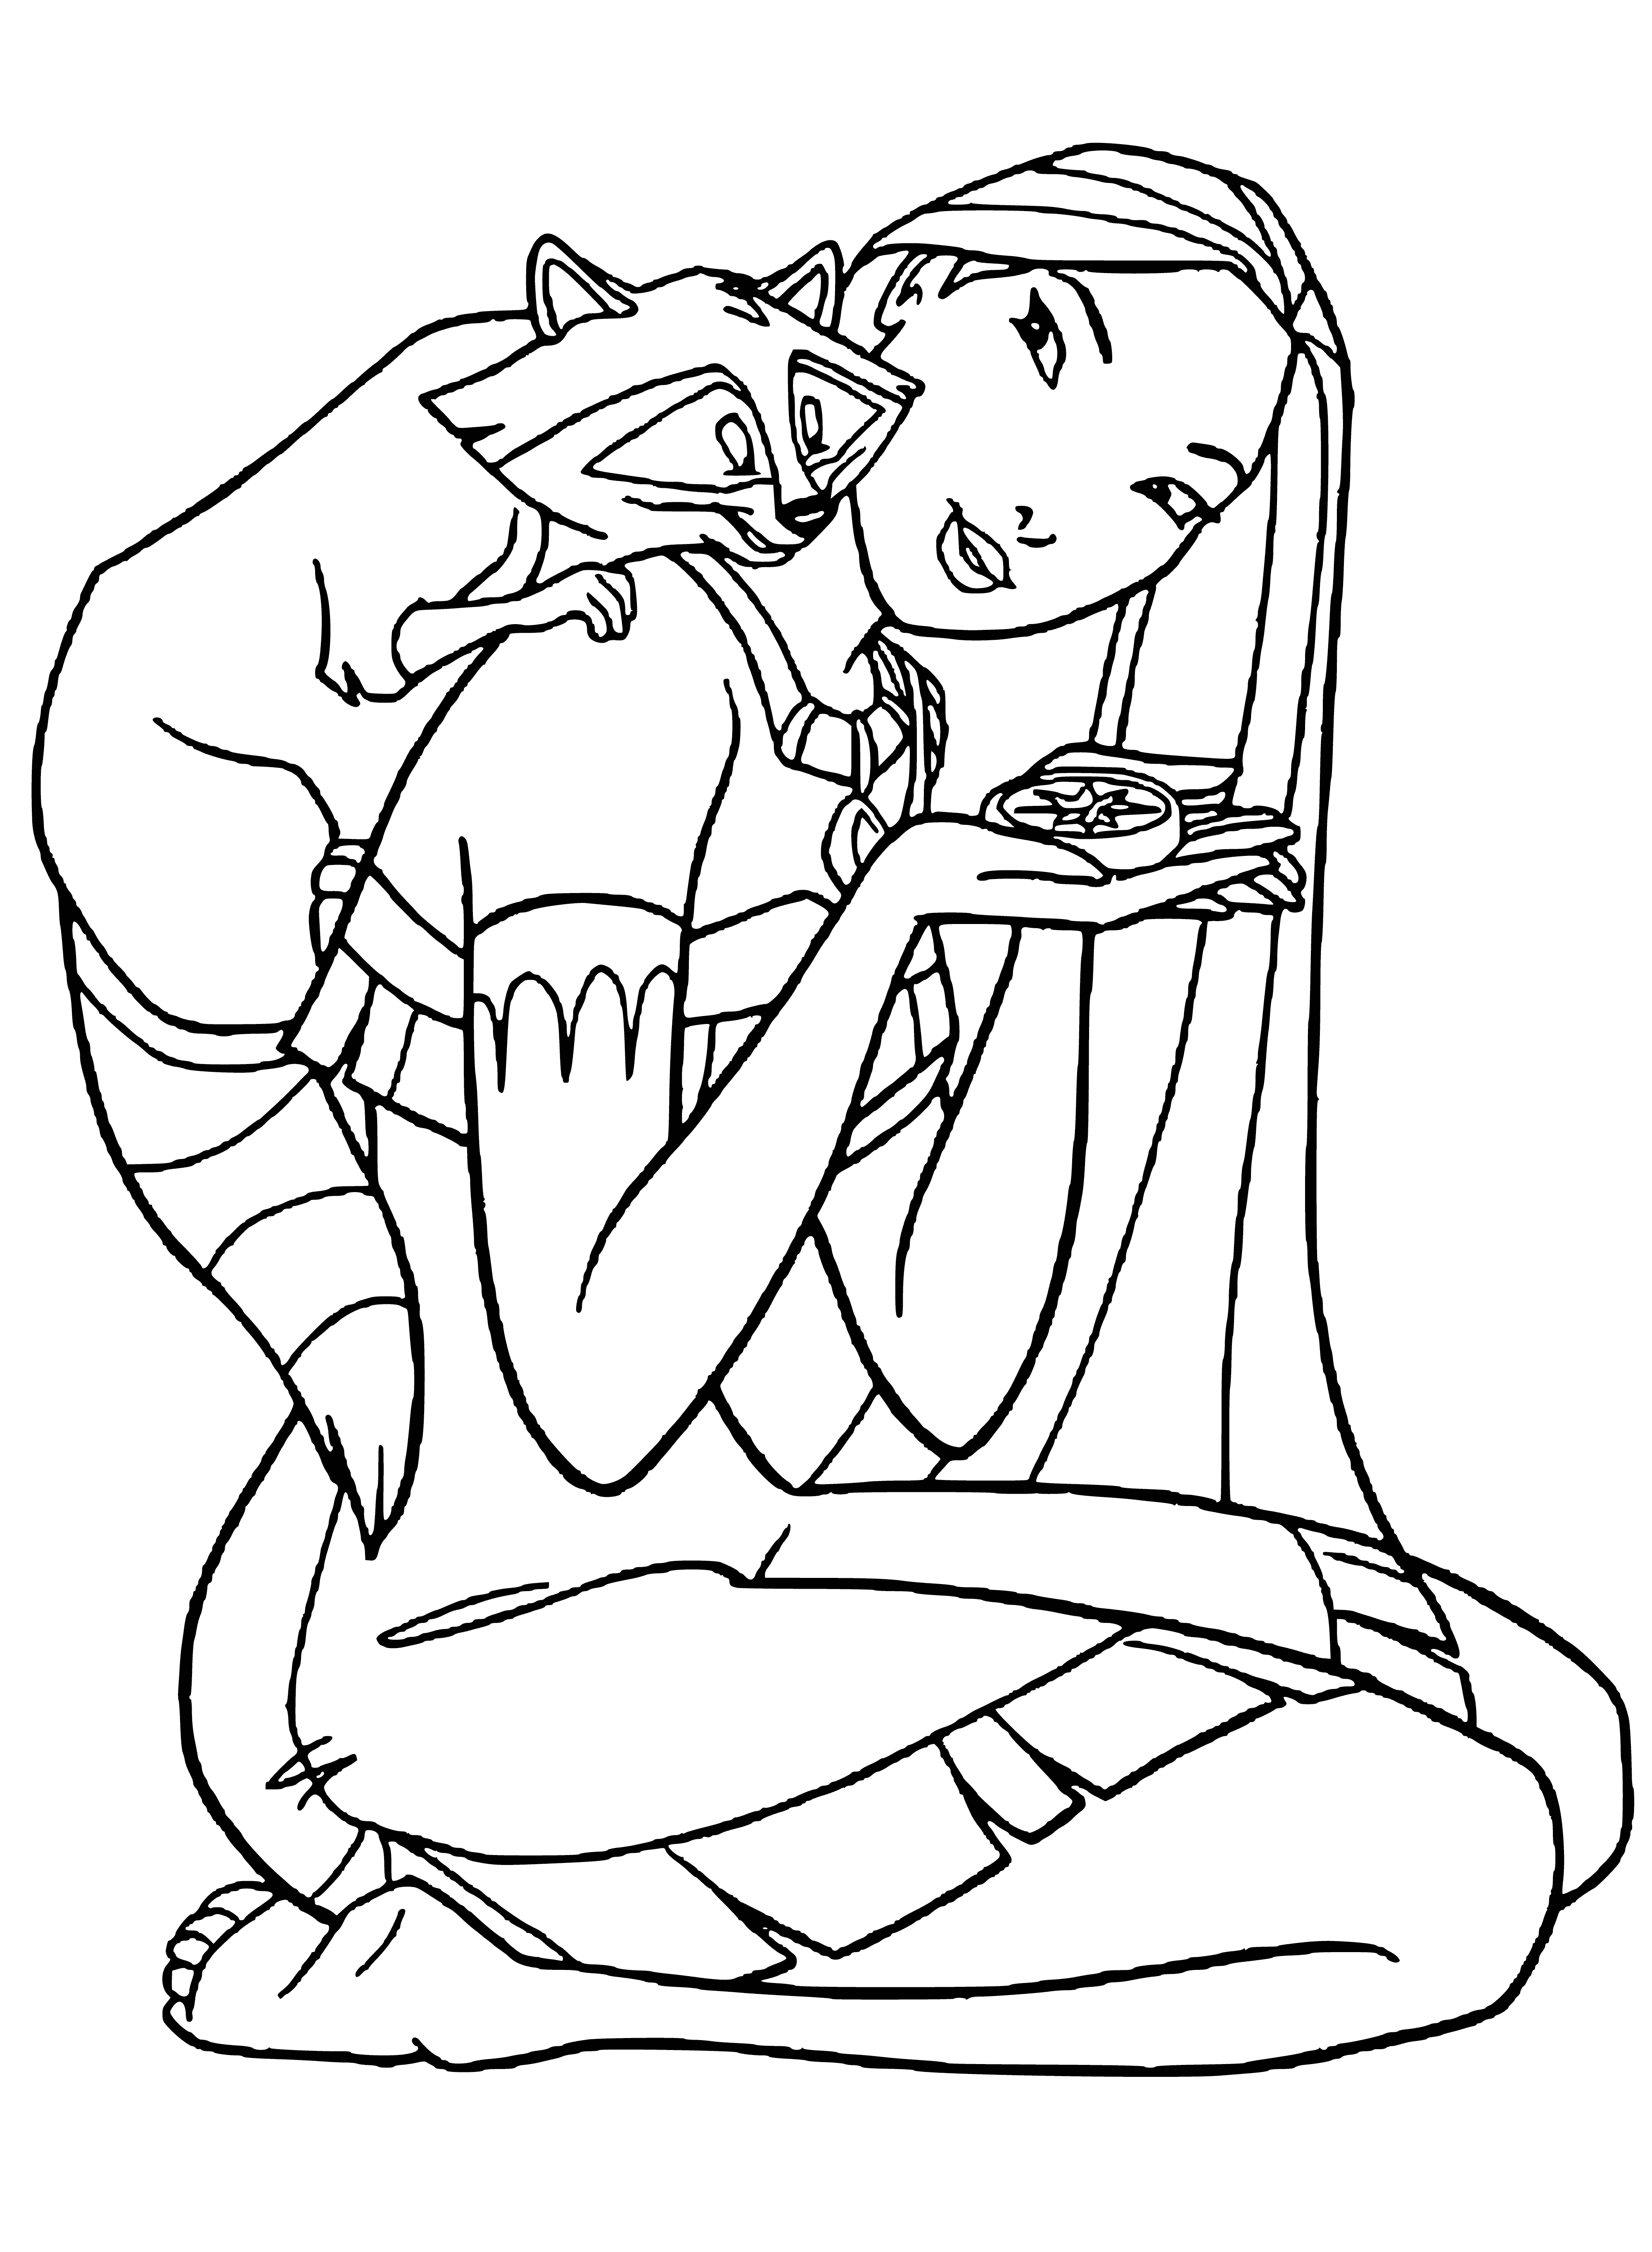 Pocahontas holding a compass coloring page